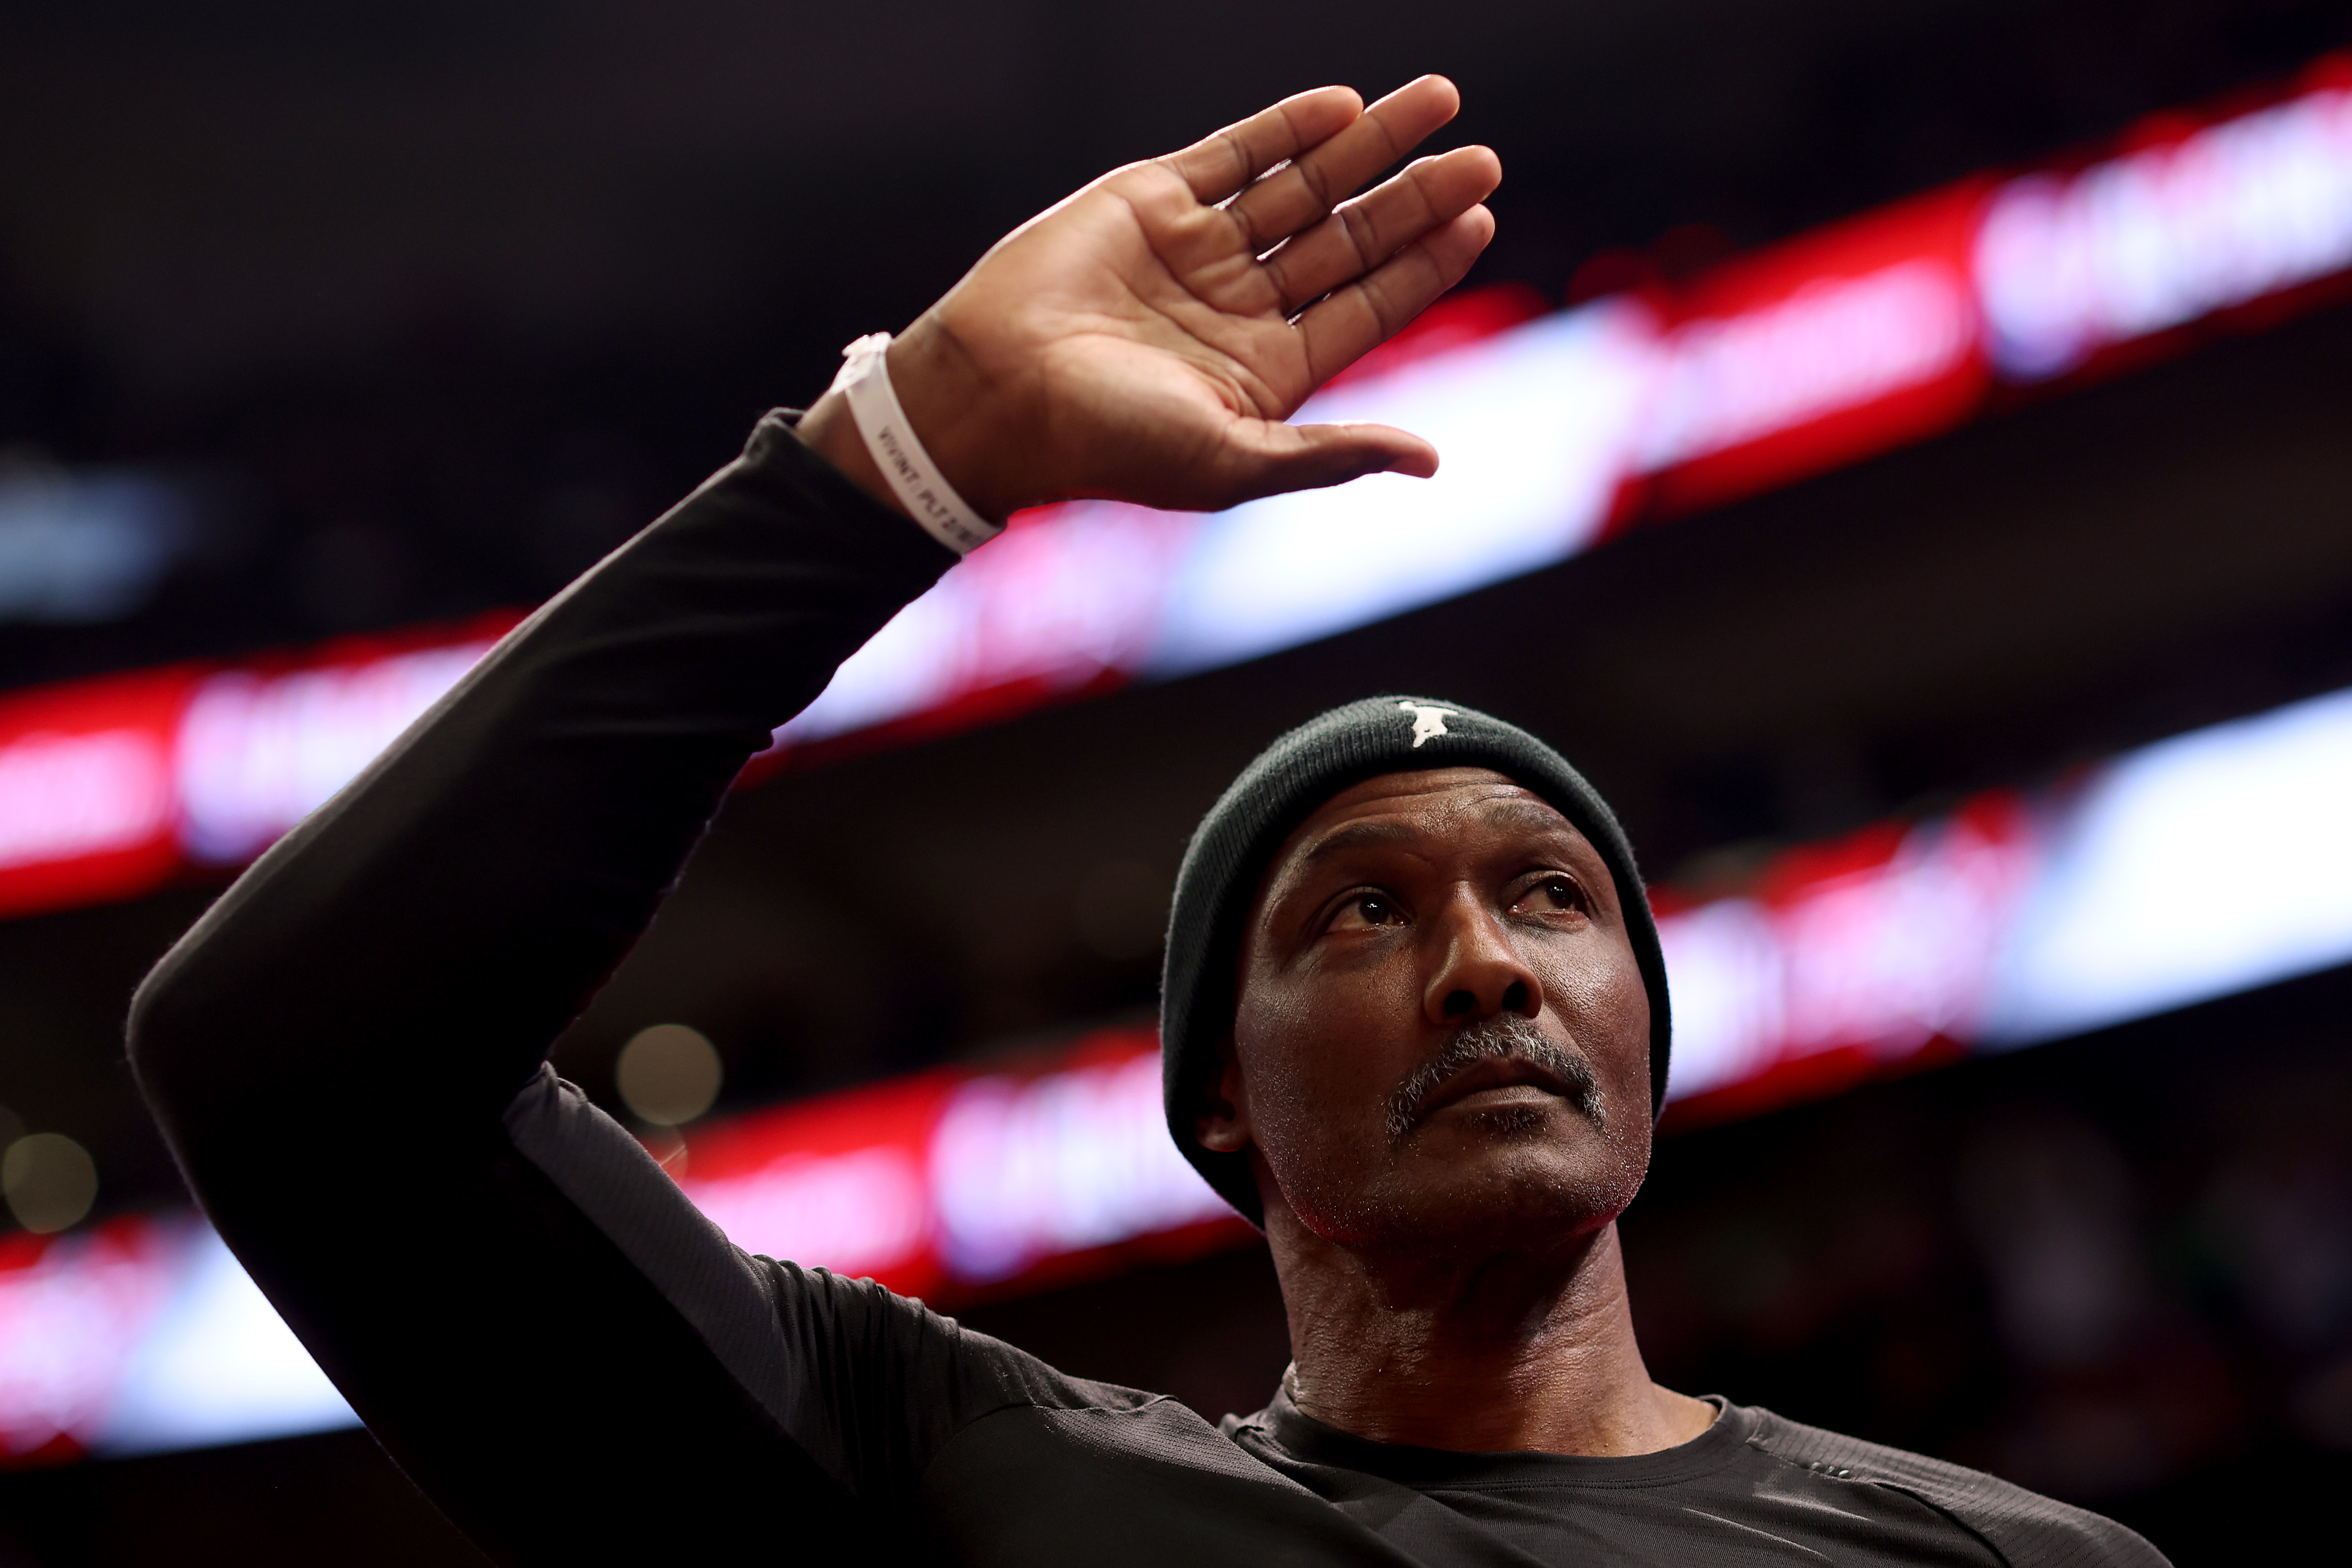 Karl Malone during the NBA All-Star Starry 3-Point Contest on February 18, 2023, in Salt Lake City, Utah | Source: Getty Images